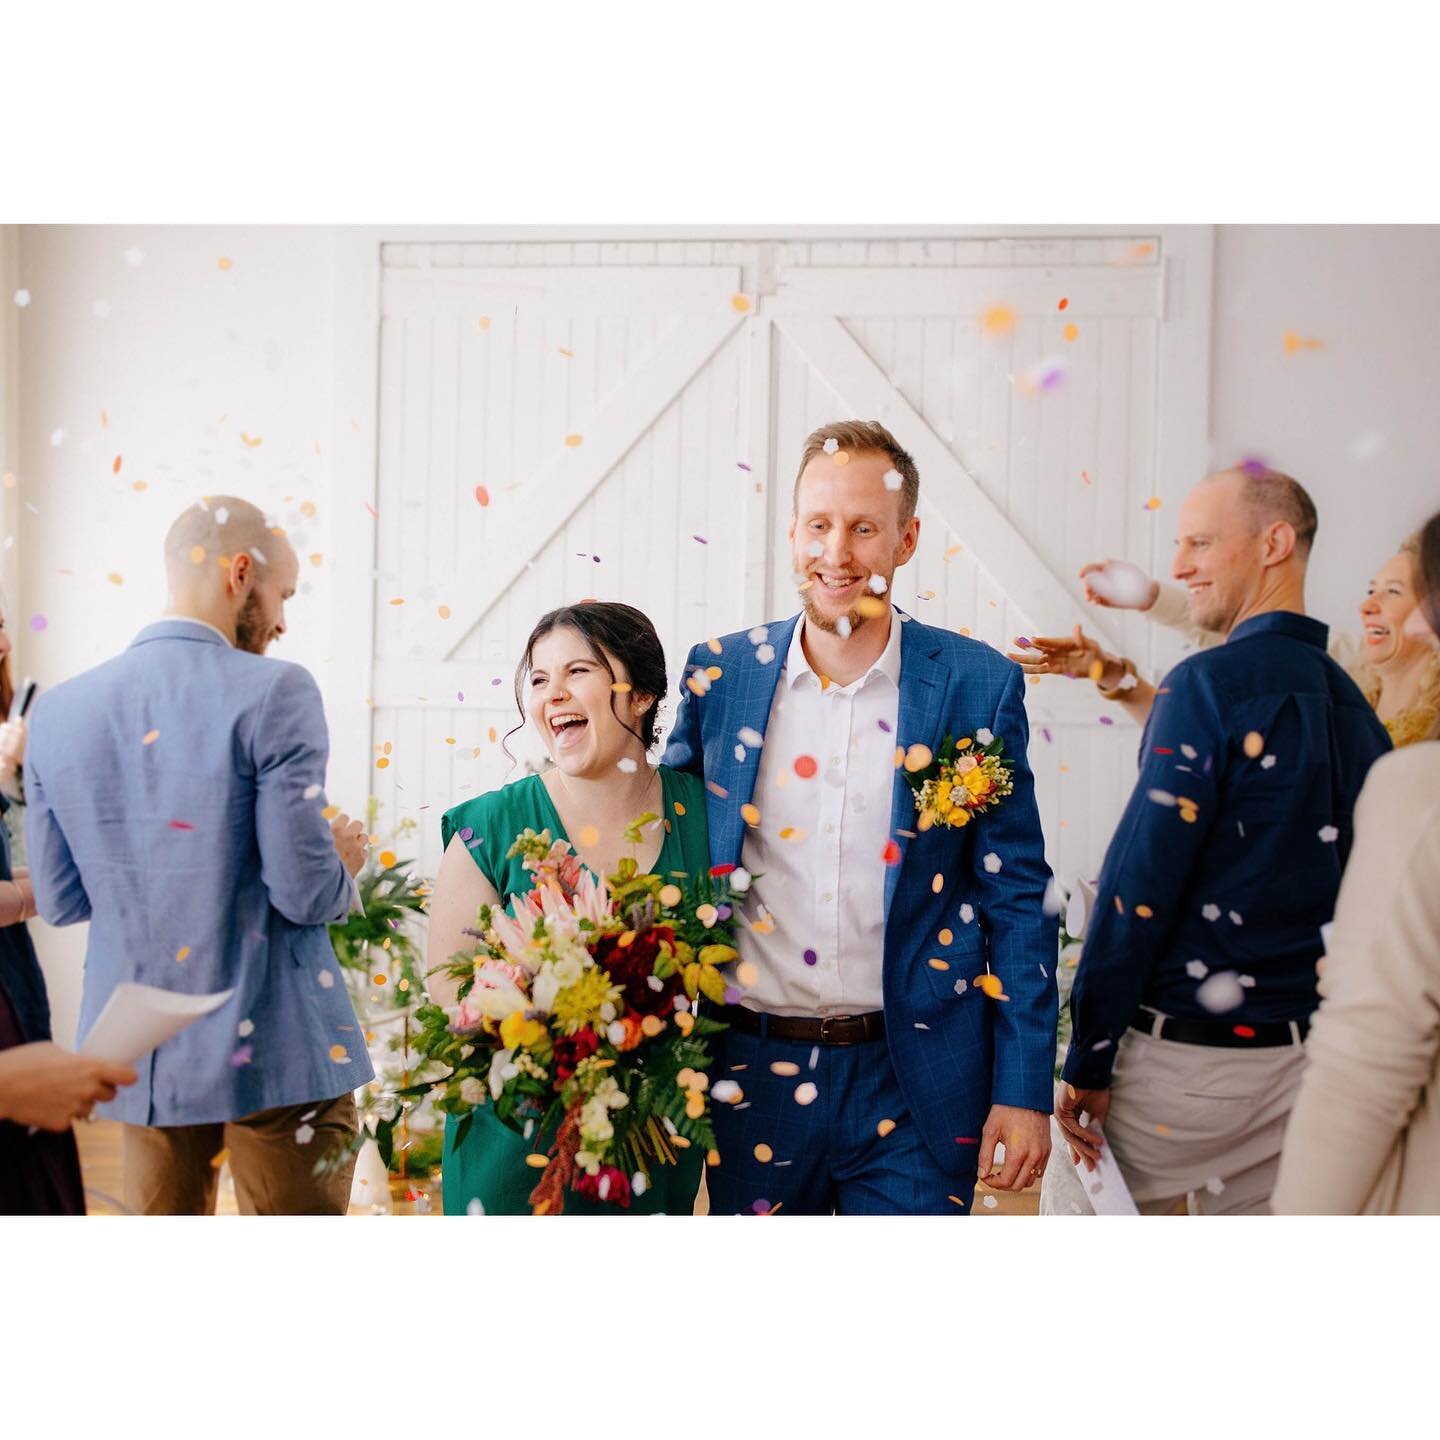 I blogged! Hurrah!!! Gaby and Phil are the most wonderful couple and were such a joy to be around. You can imagine my squeals as I captured this intimate and colourful Welly wedding. This one is such a goodie with so many cool local vendors who I ado